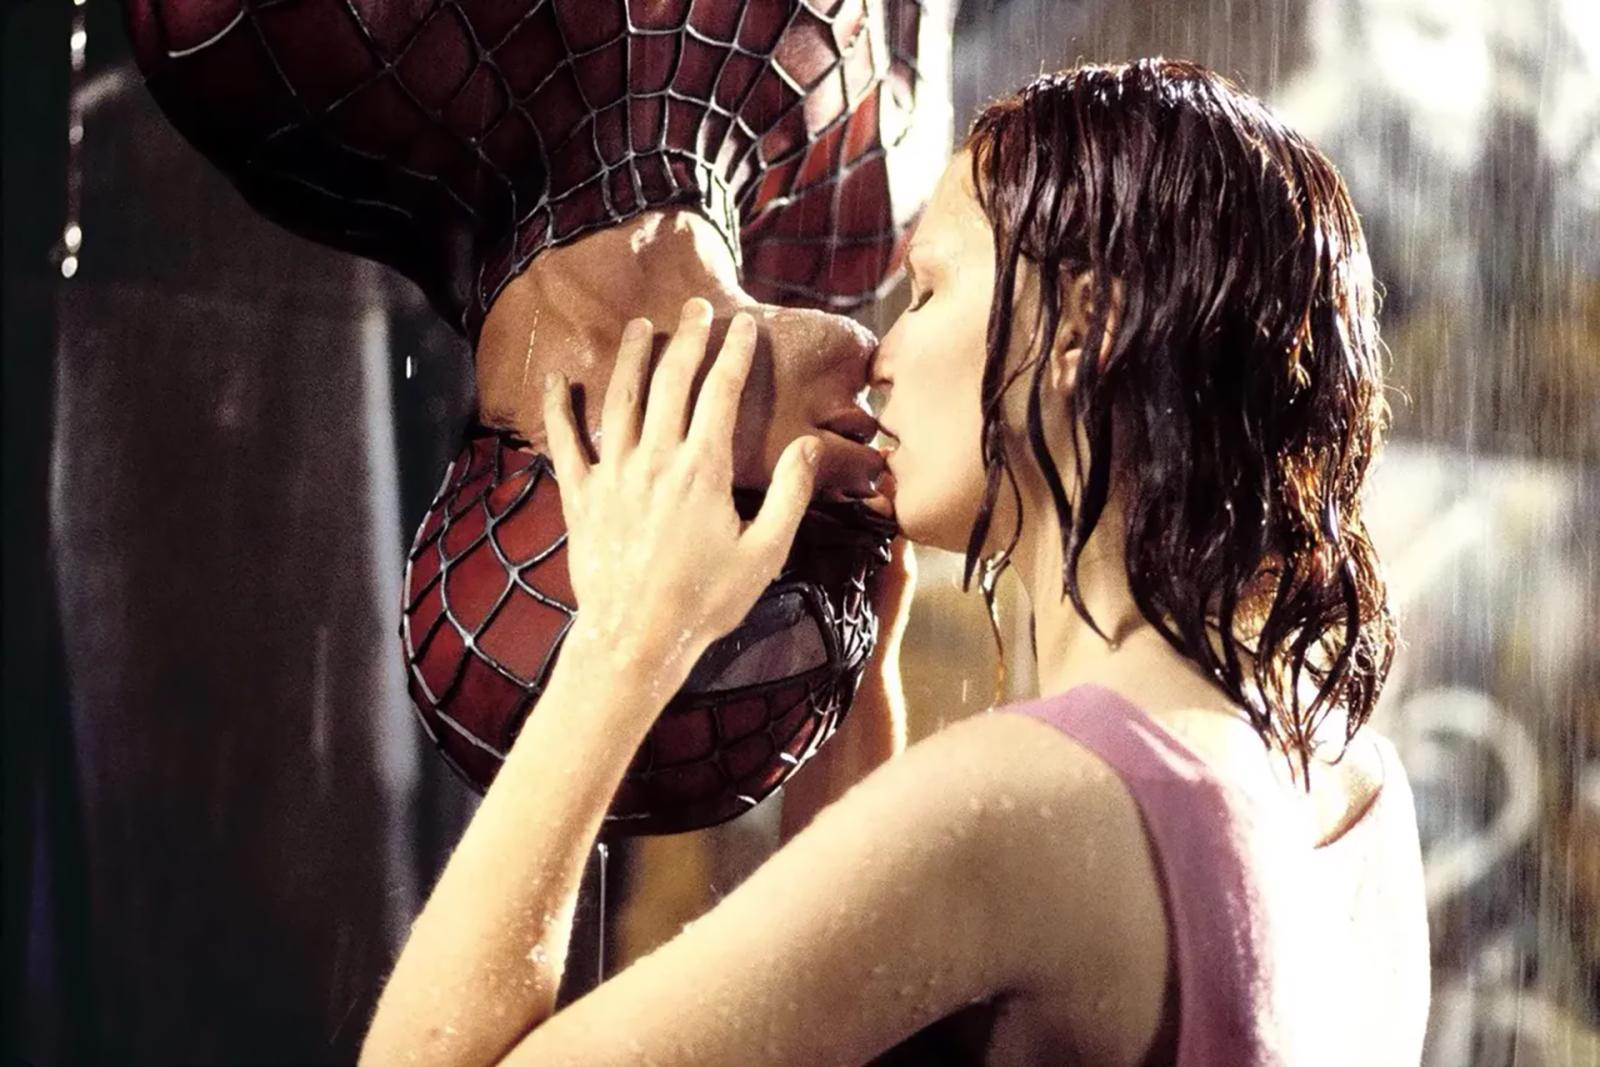 8 Of The Worst Movie Couples With Literally Zero Chemistry on Screen - image 4